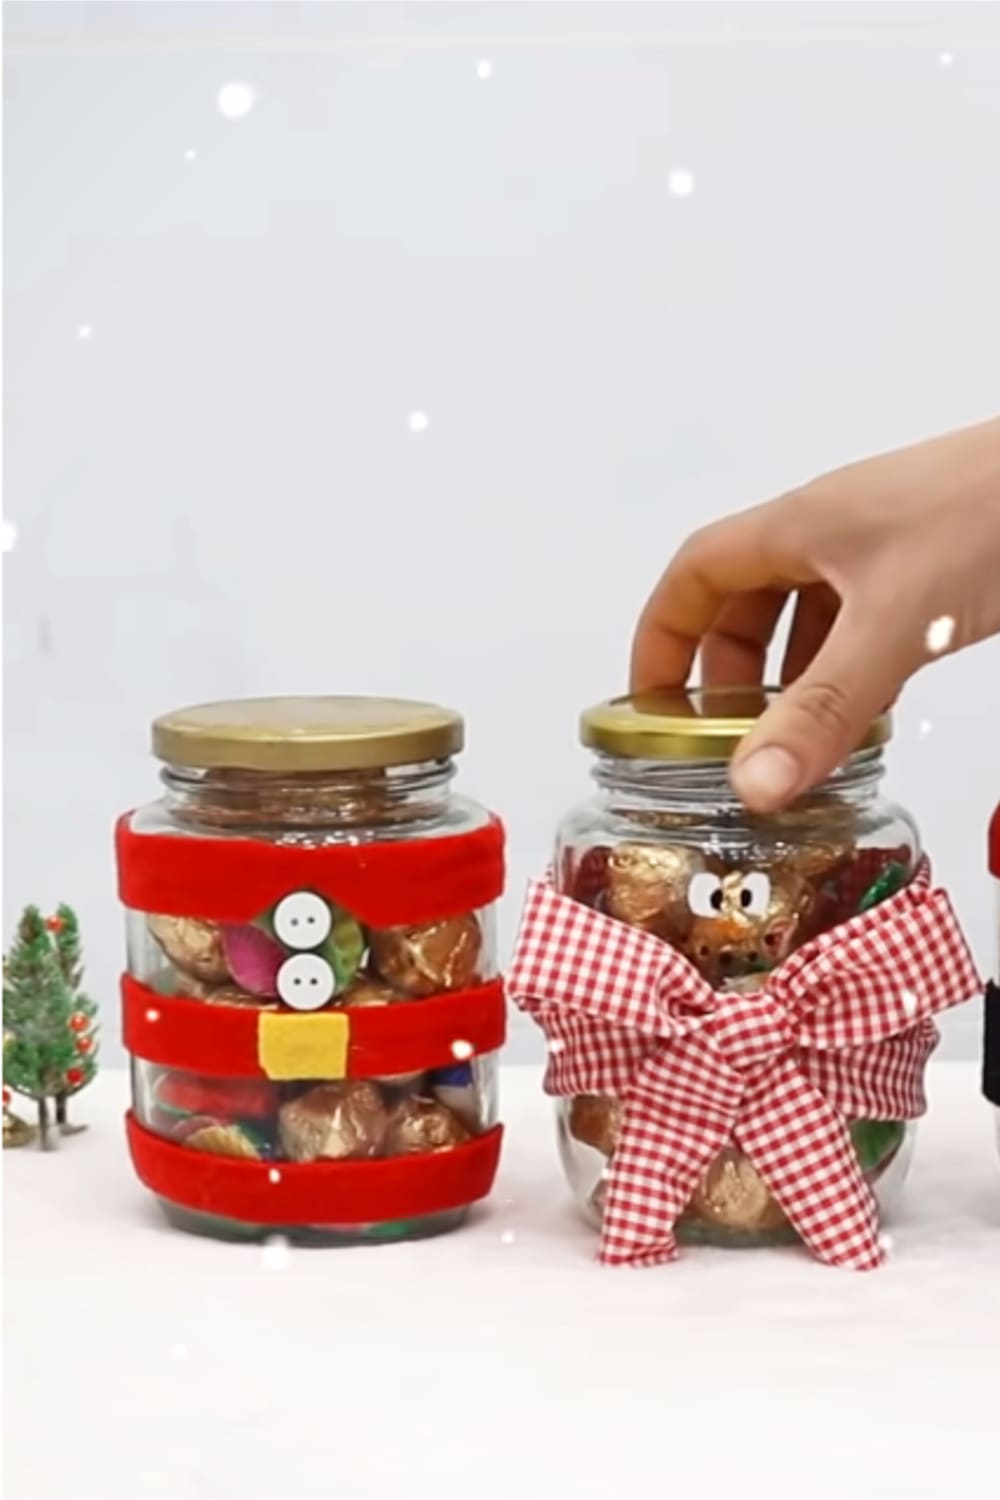 Christmas crafts for adults-simple Christmas craft ideas for adults to make - like  these DIY Christmas gift jars - perfet for decoration or for handmade gifts this year